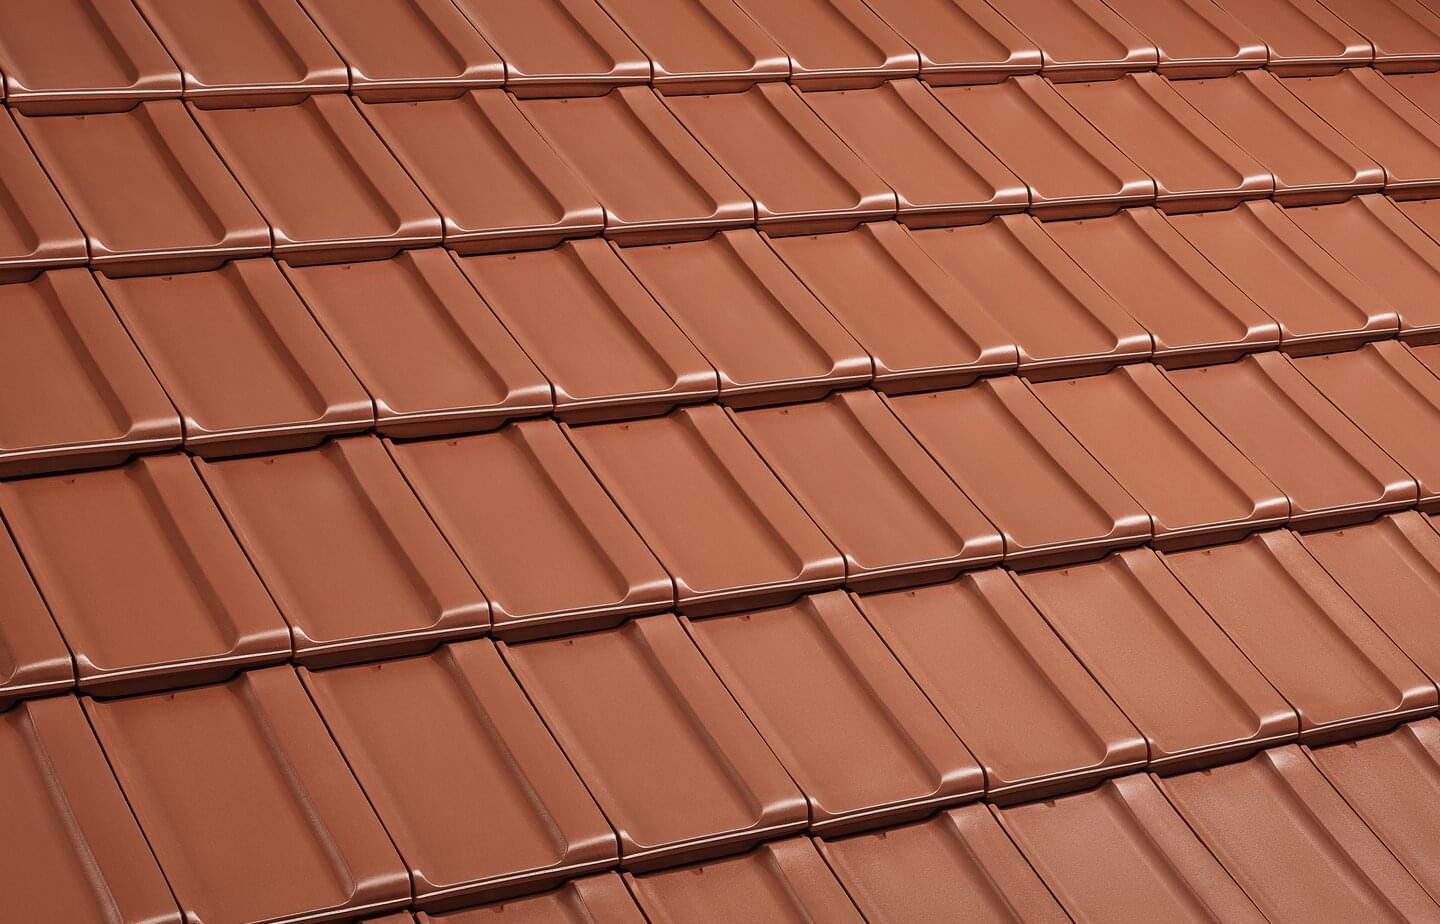 Reformpfanne SL - Copper brown | Image roof surface | © © ERLUS AG 2021